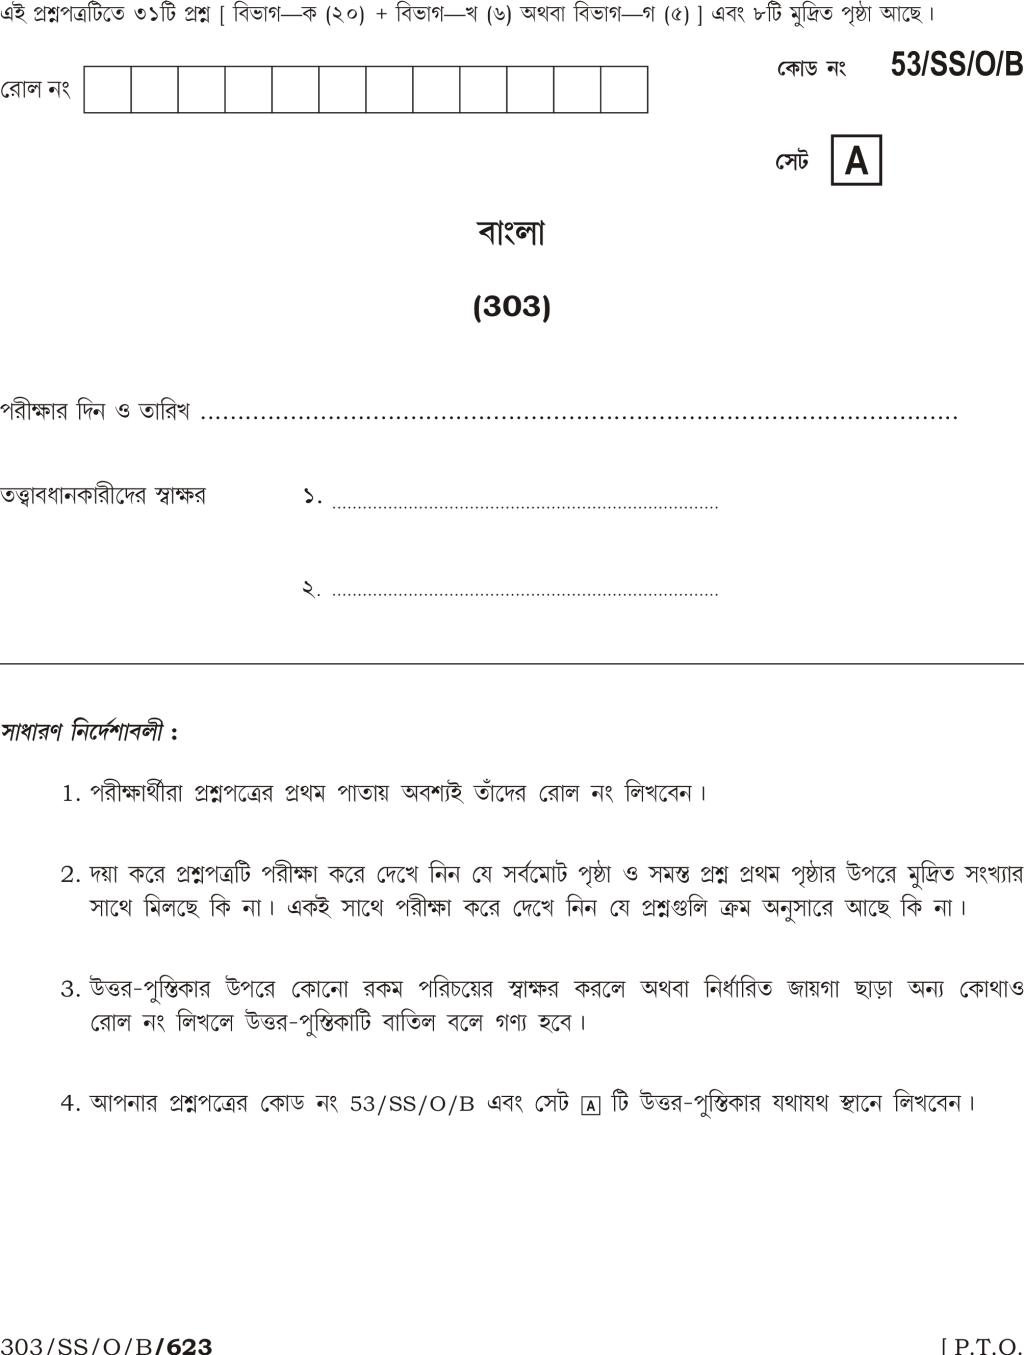 NIOS Class 12 Question Paper Oct 2016 - Bengali - Page 1